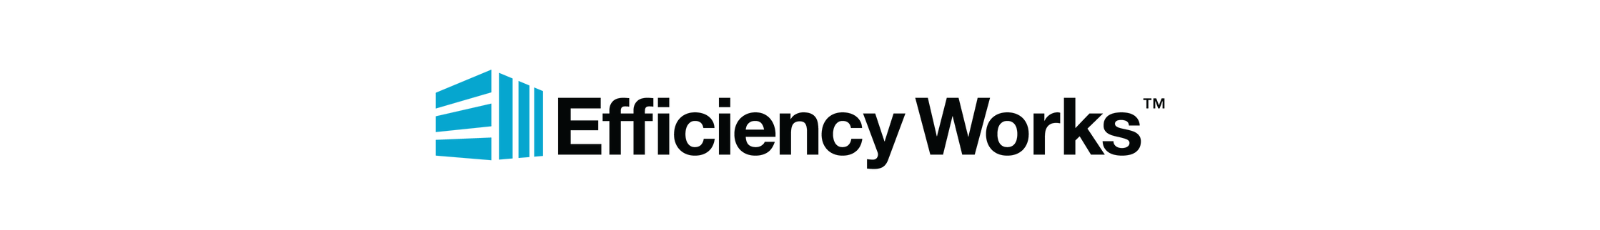 Efficiency Works HS form Banner 1600x230